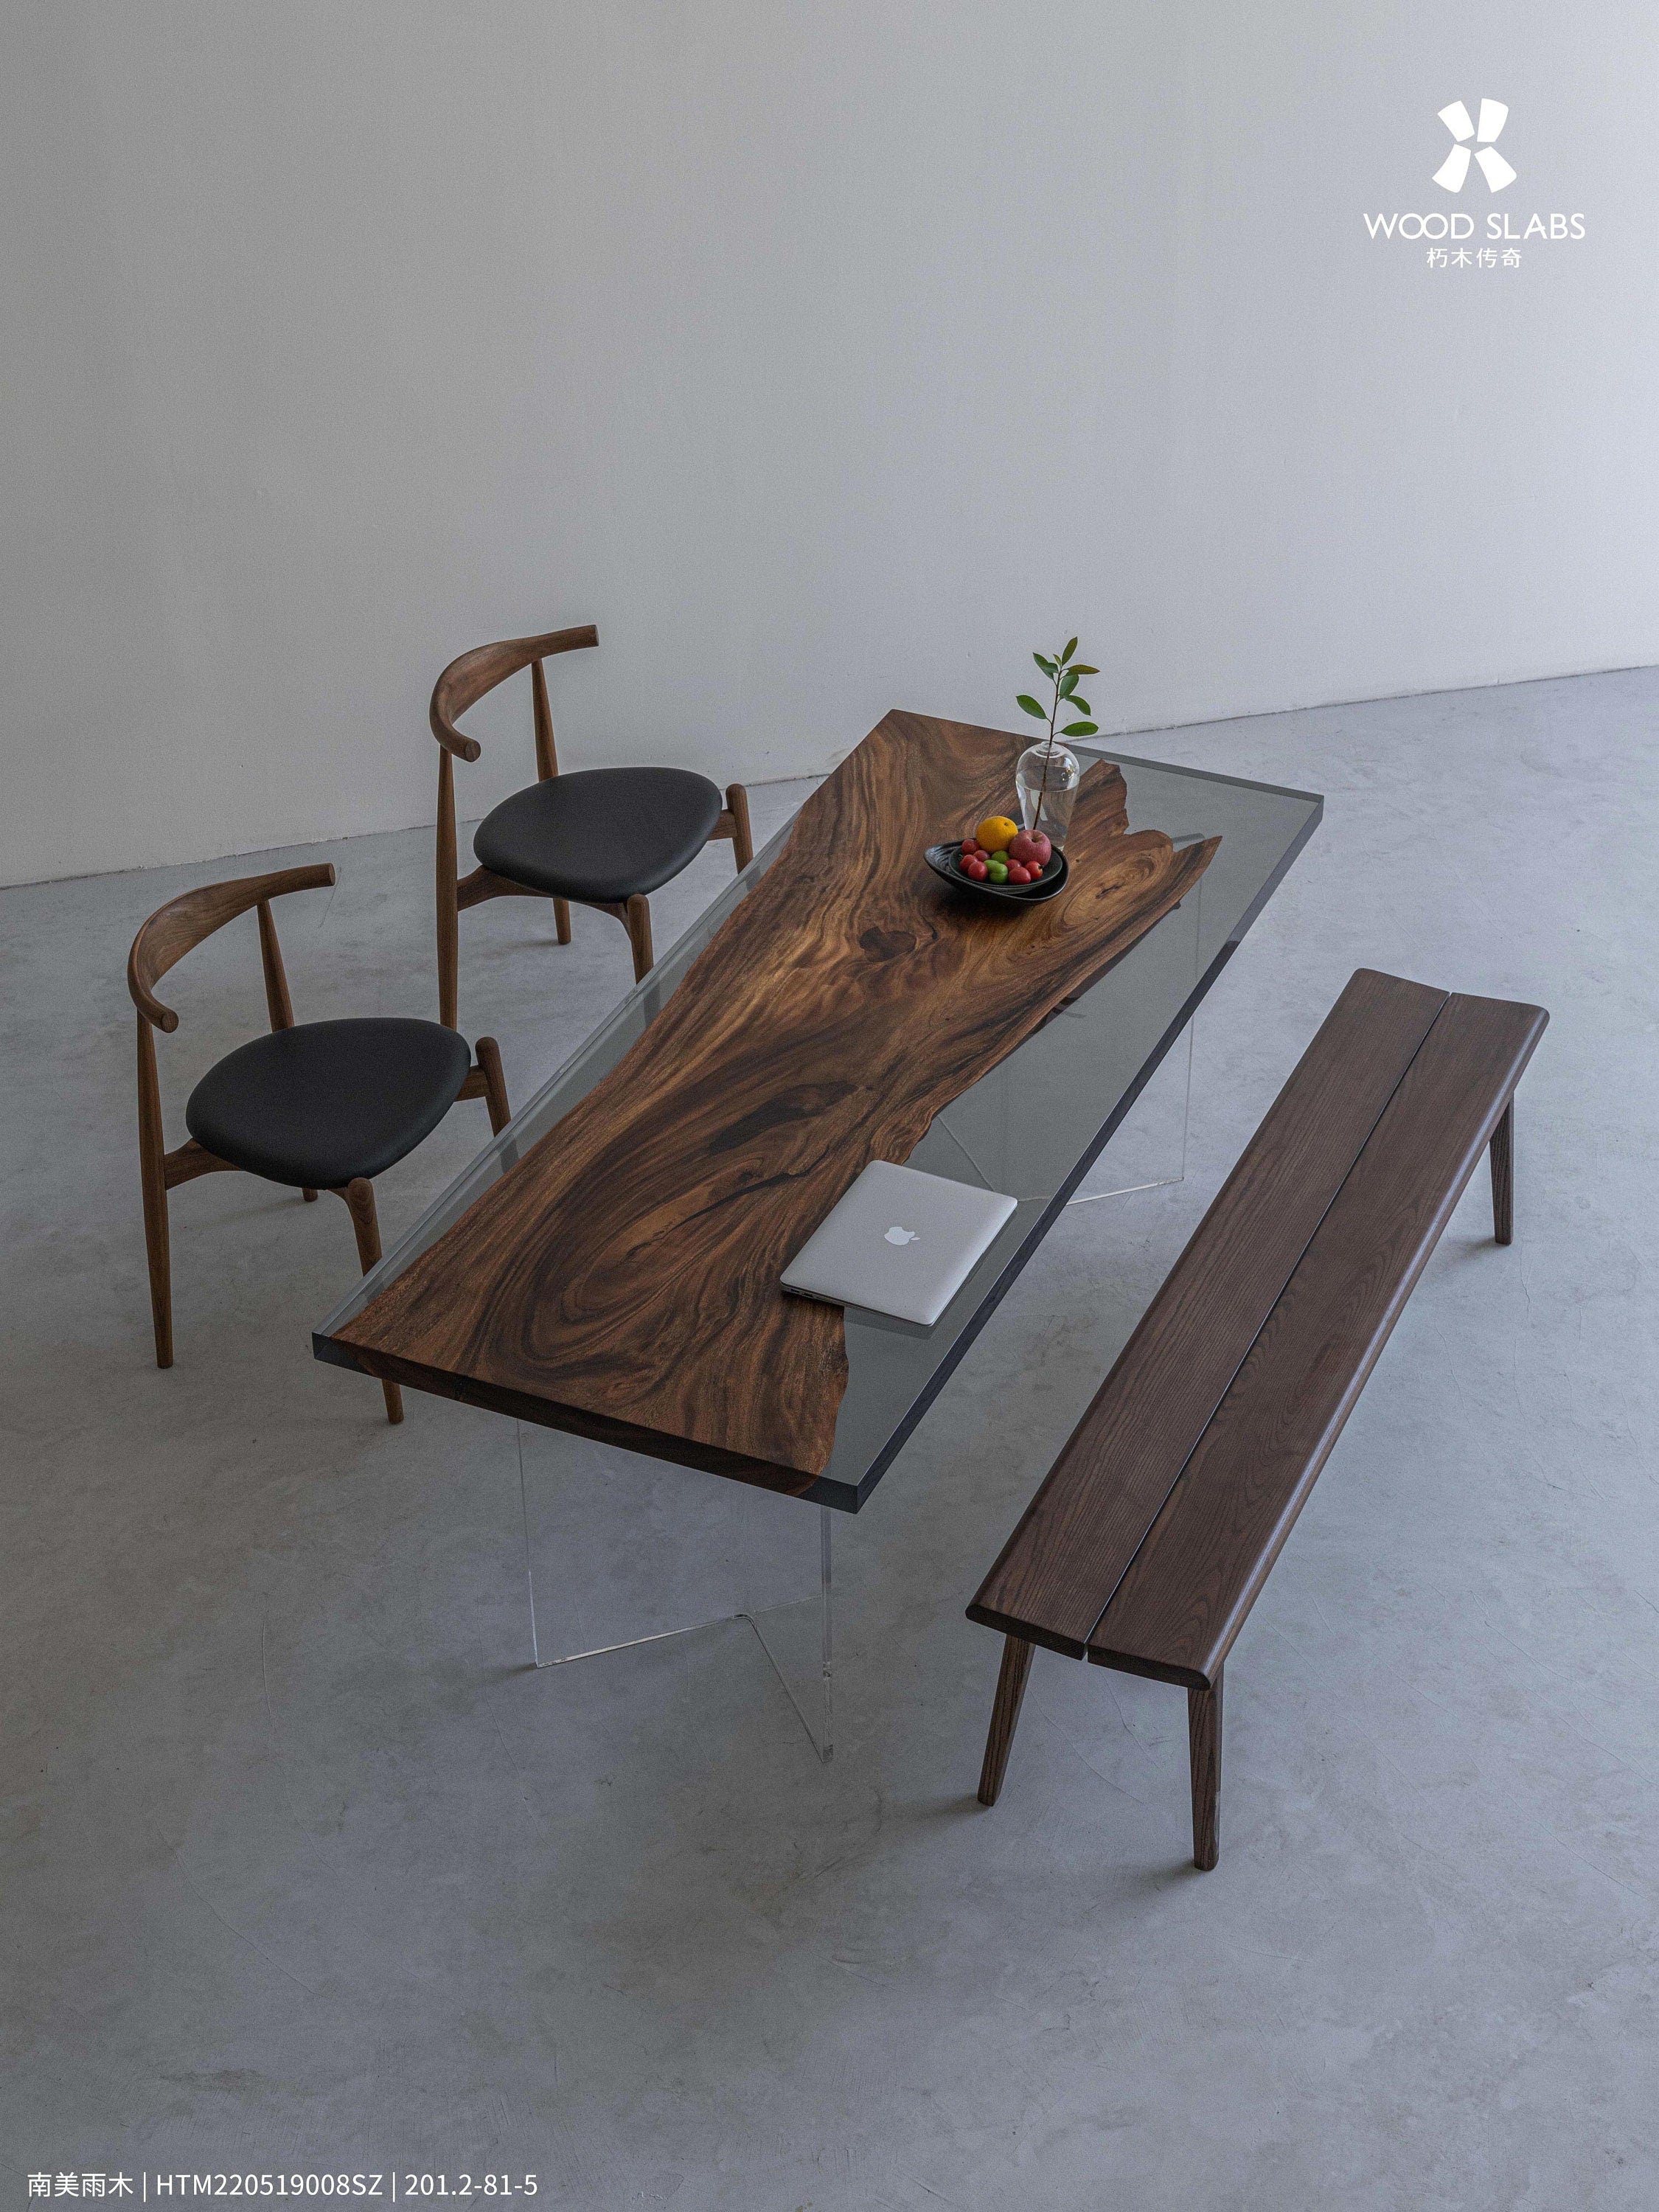 new modern table, epoxy table, epoxy resin table, River table,not olive wood, epoxy desk